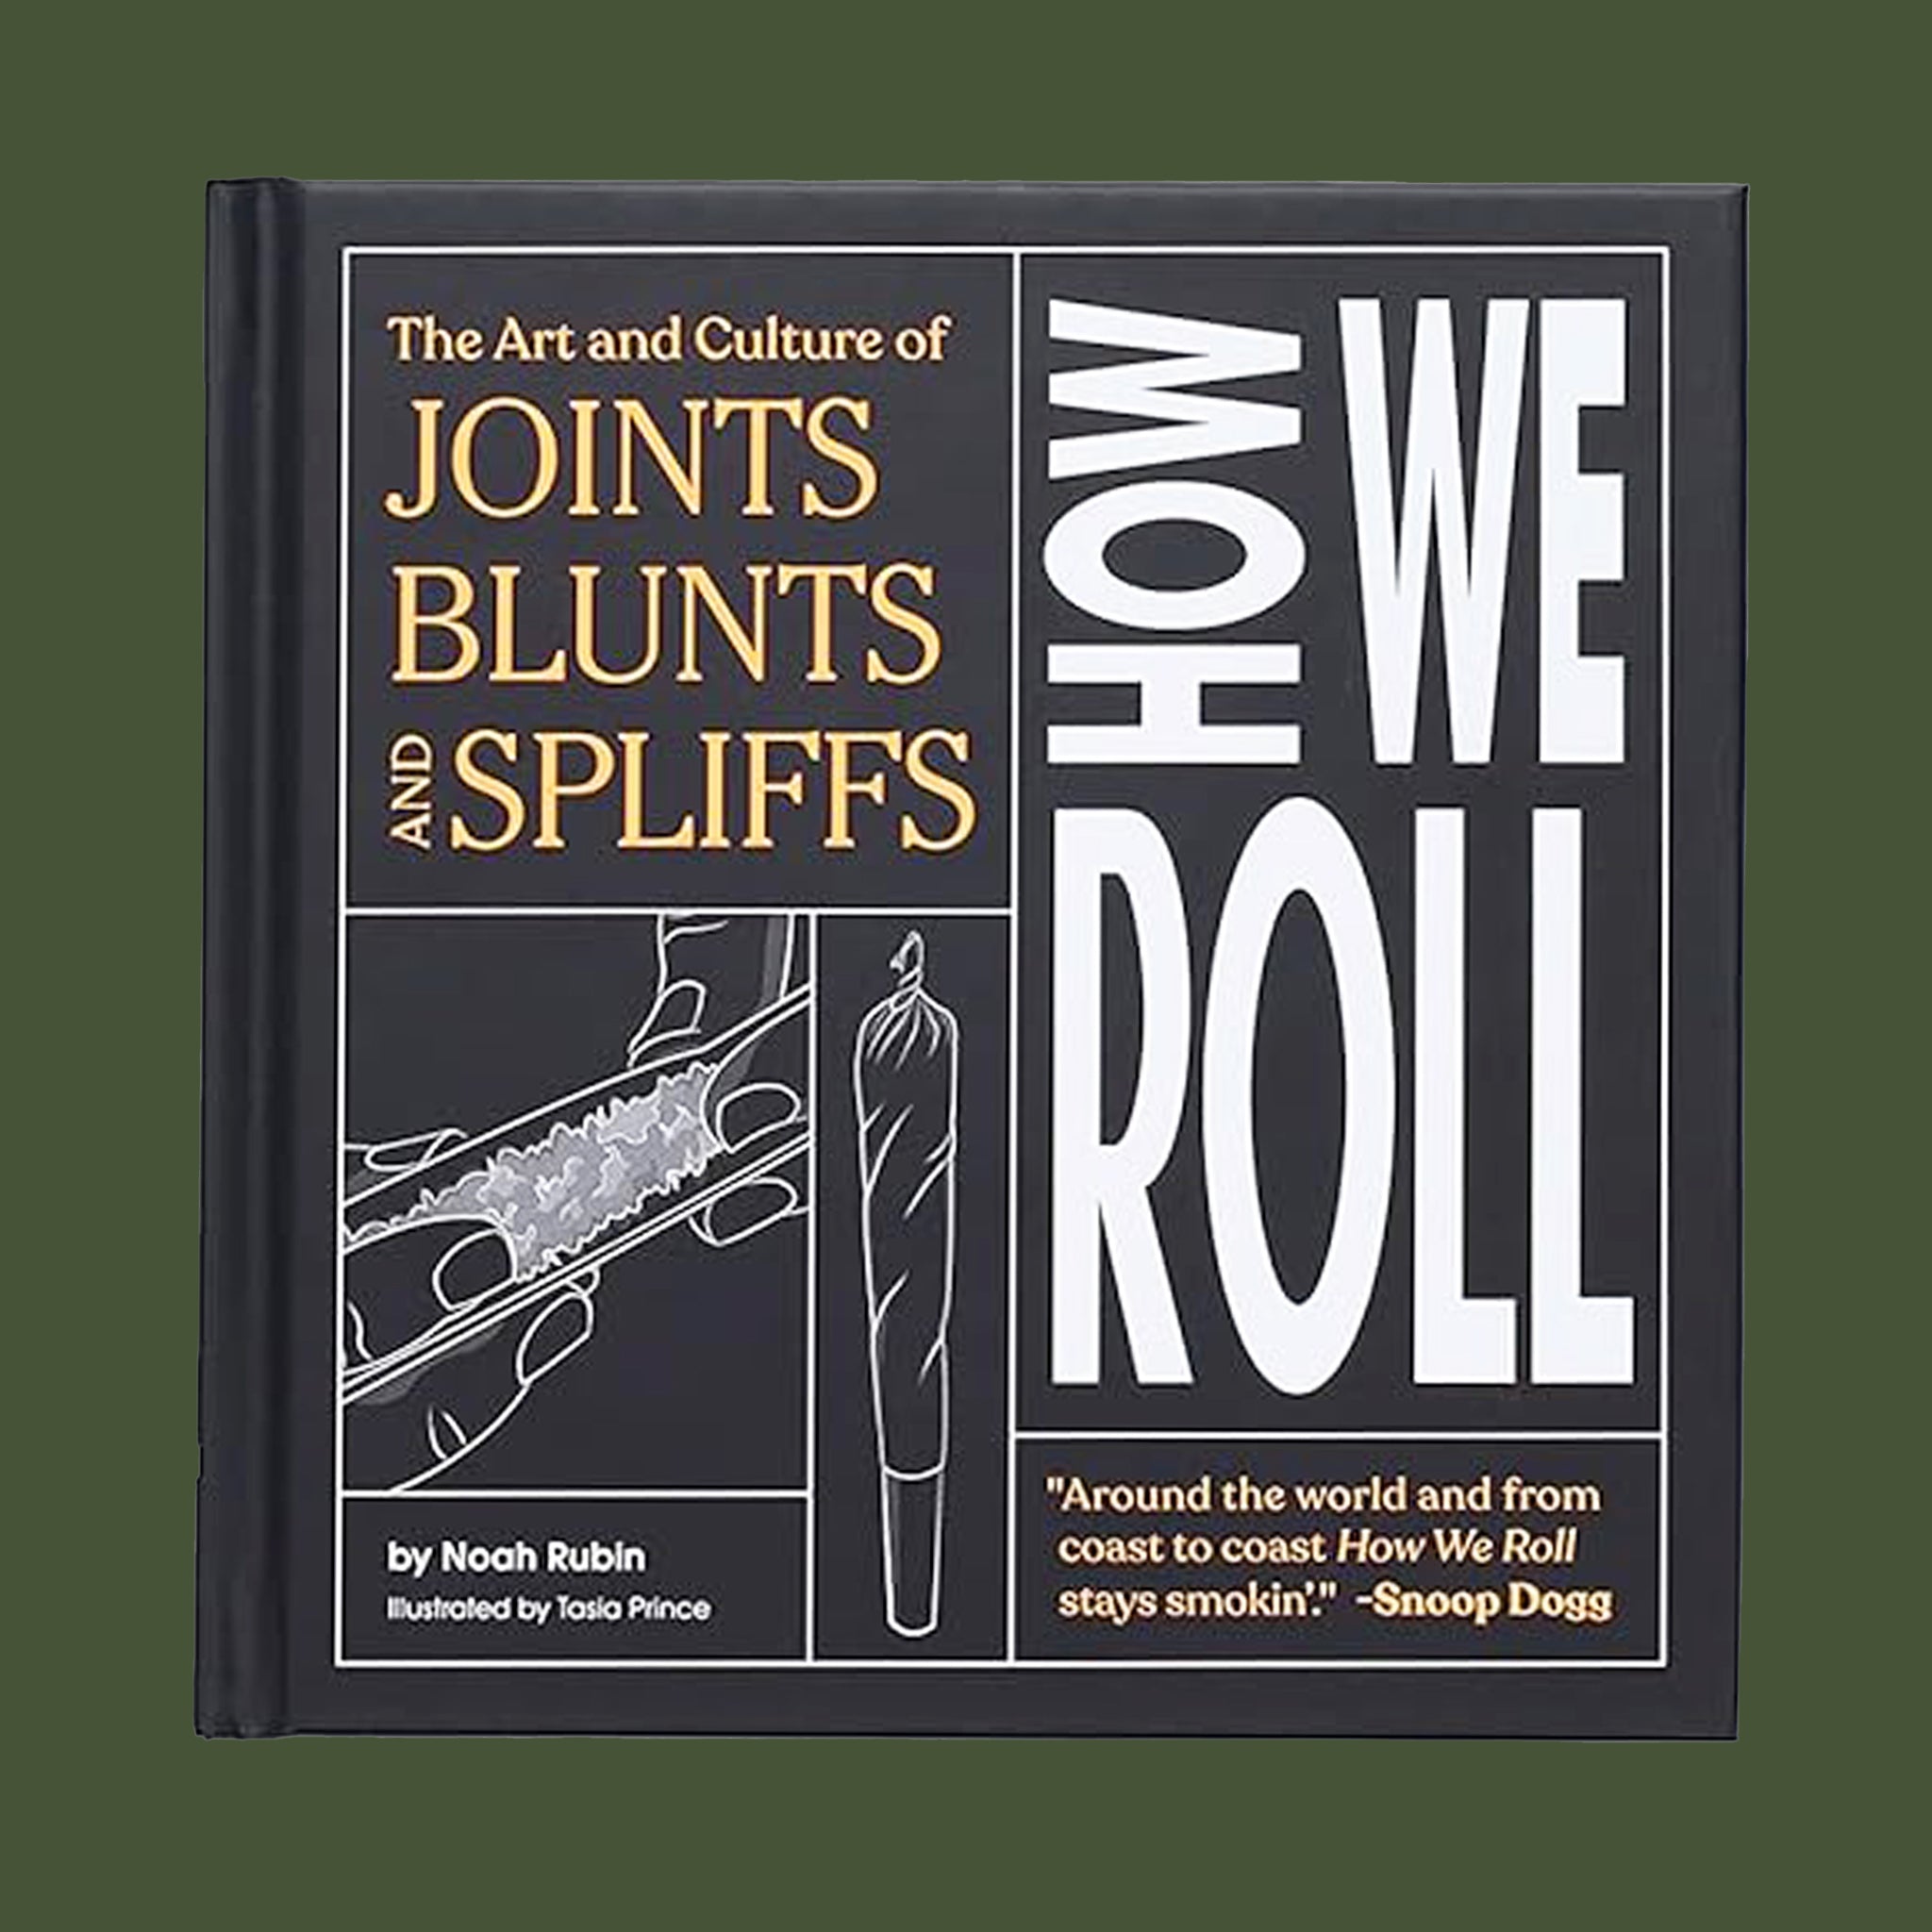 On a dark green background is a black book cover with text that reads, "The Art and Culture of Joints Blunts and Spliffs How We Roll". 